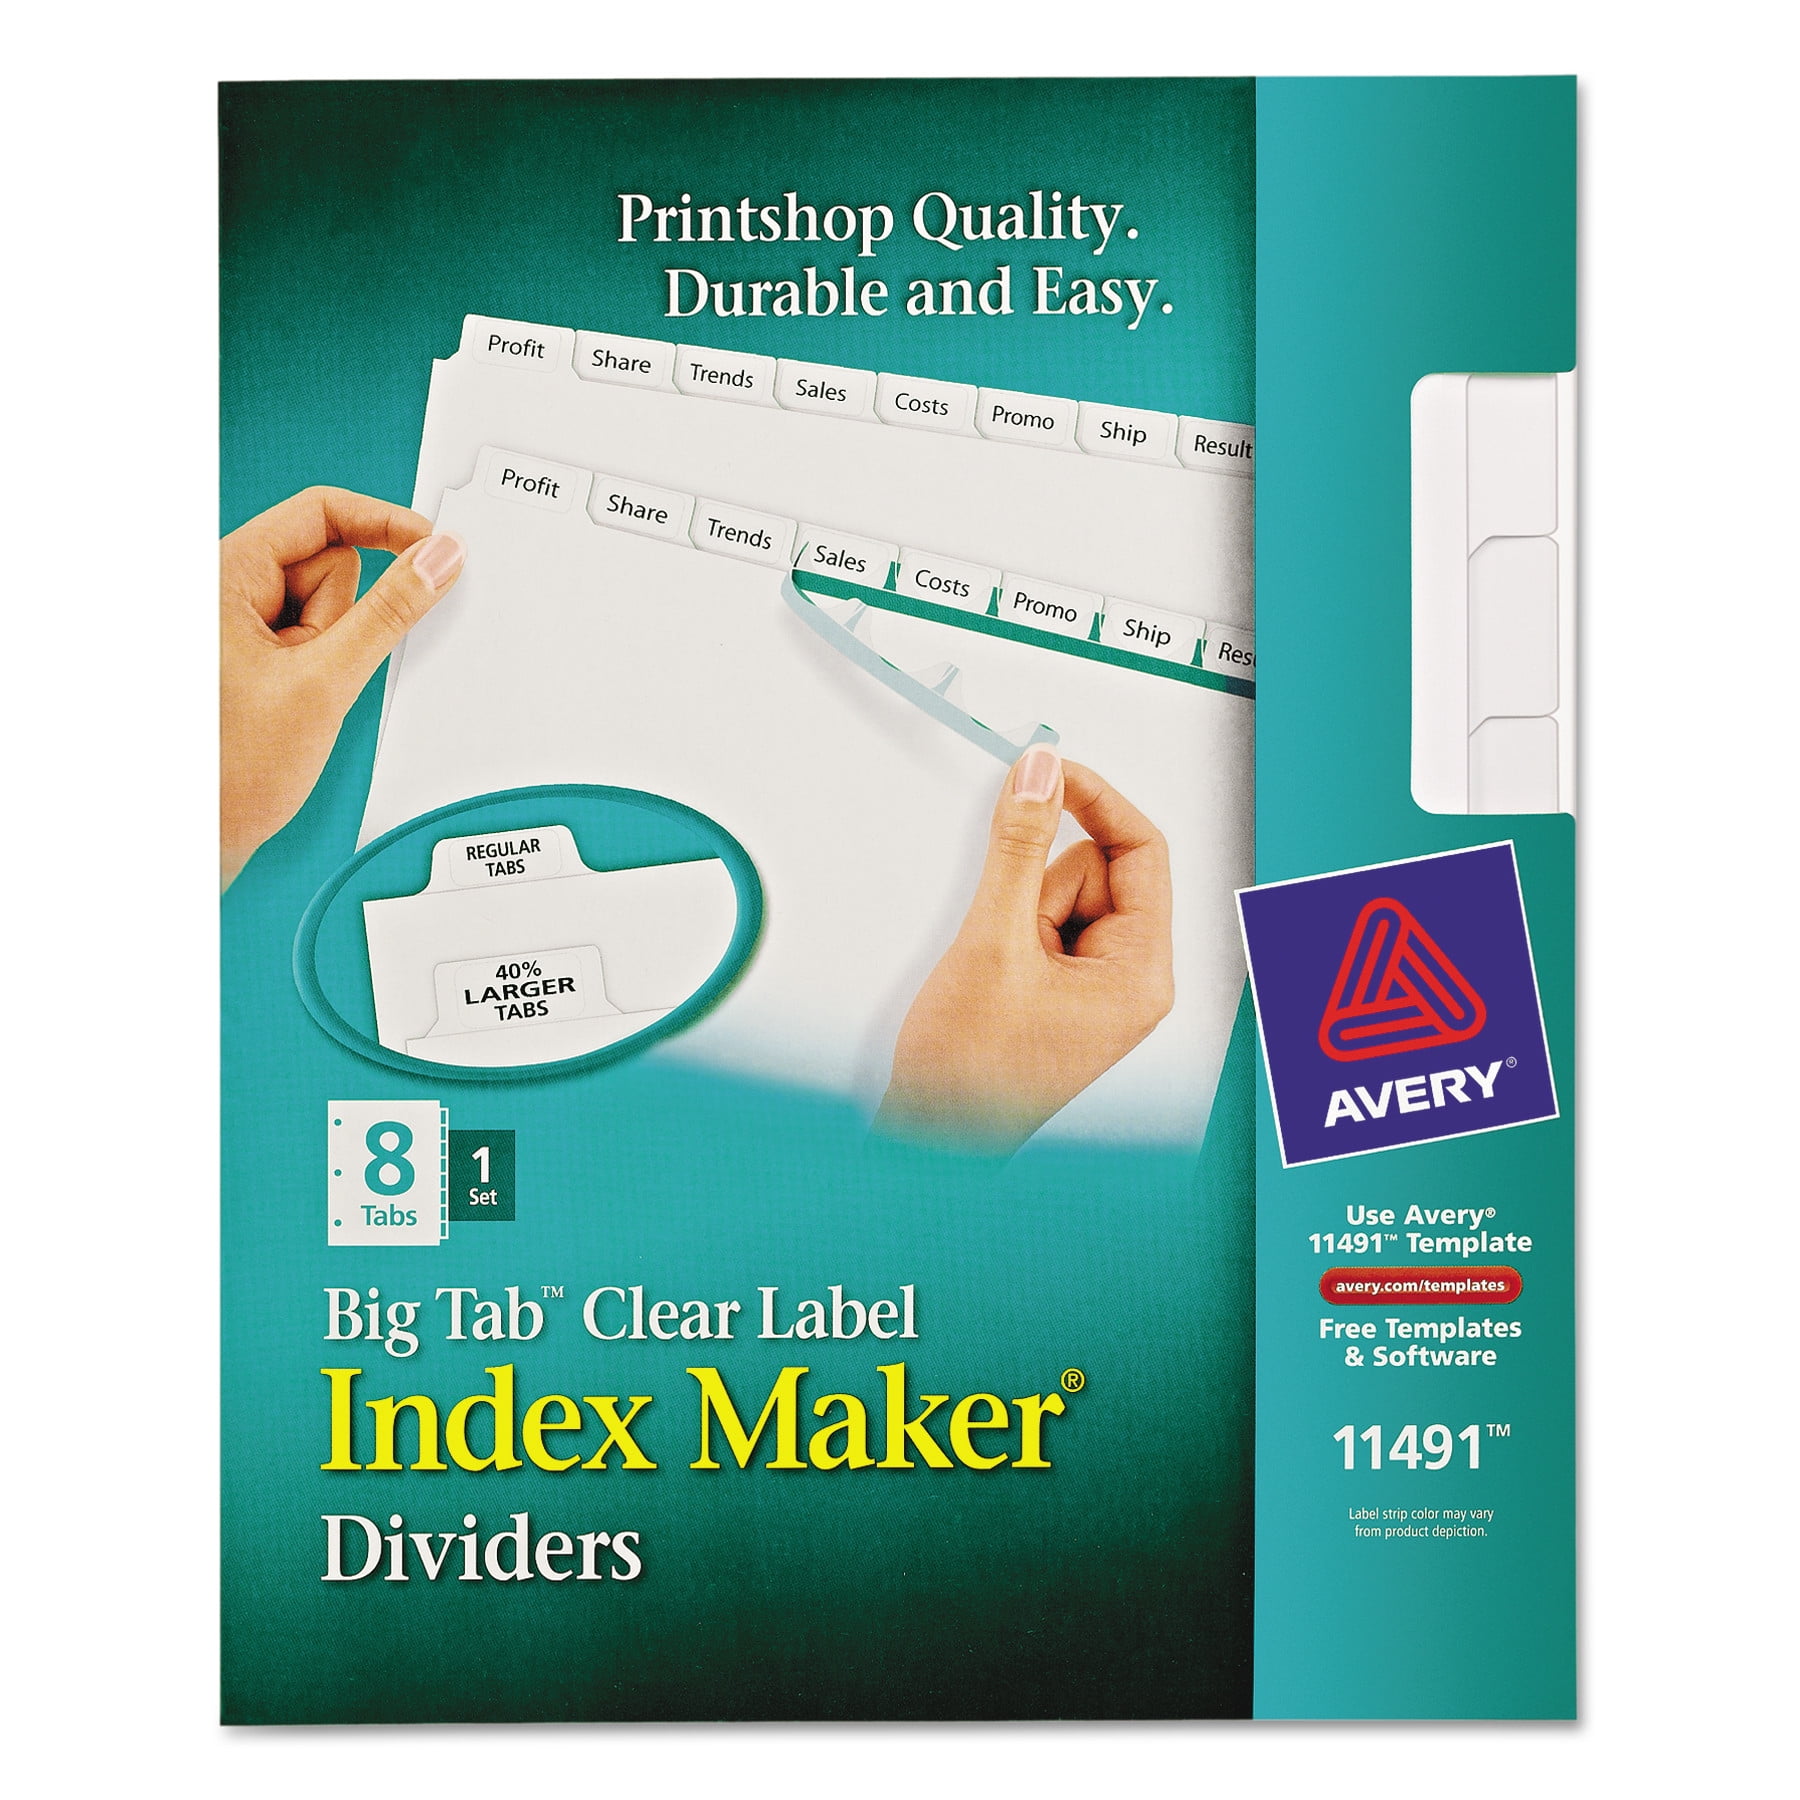 Avery 11416 Clear Label Index Maker Dividers 8.5 x 11 5 Tabs/Set White 